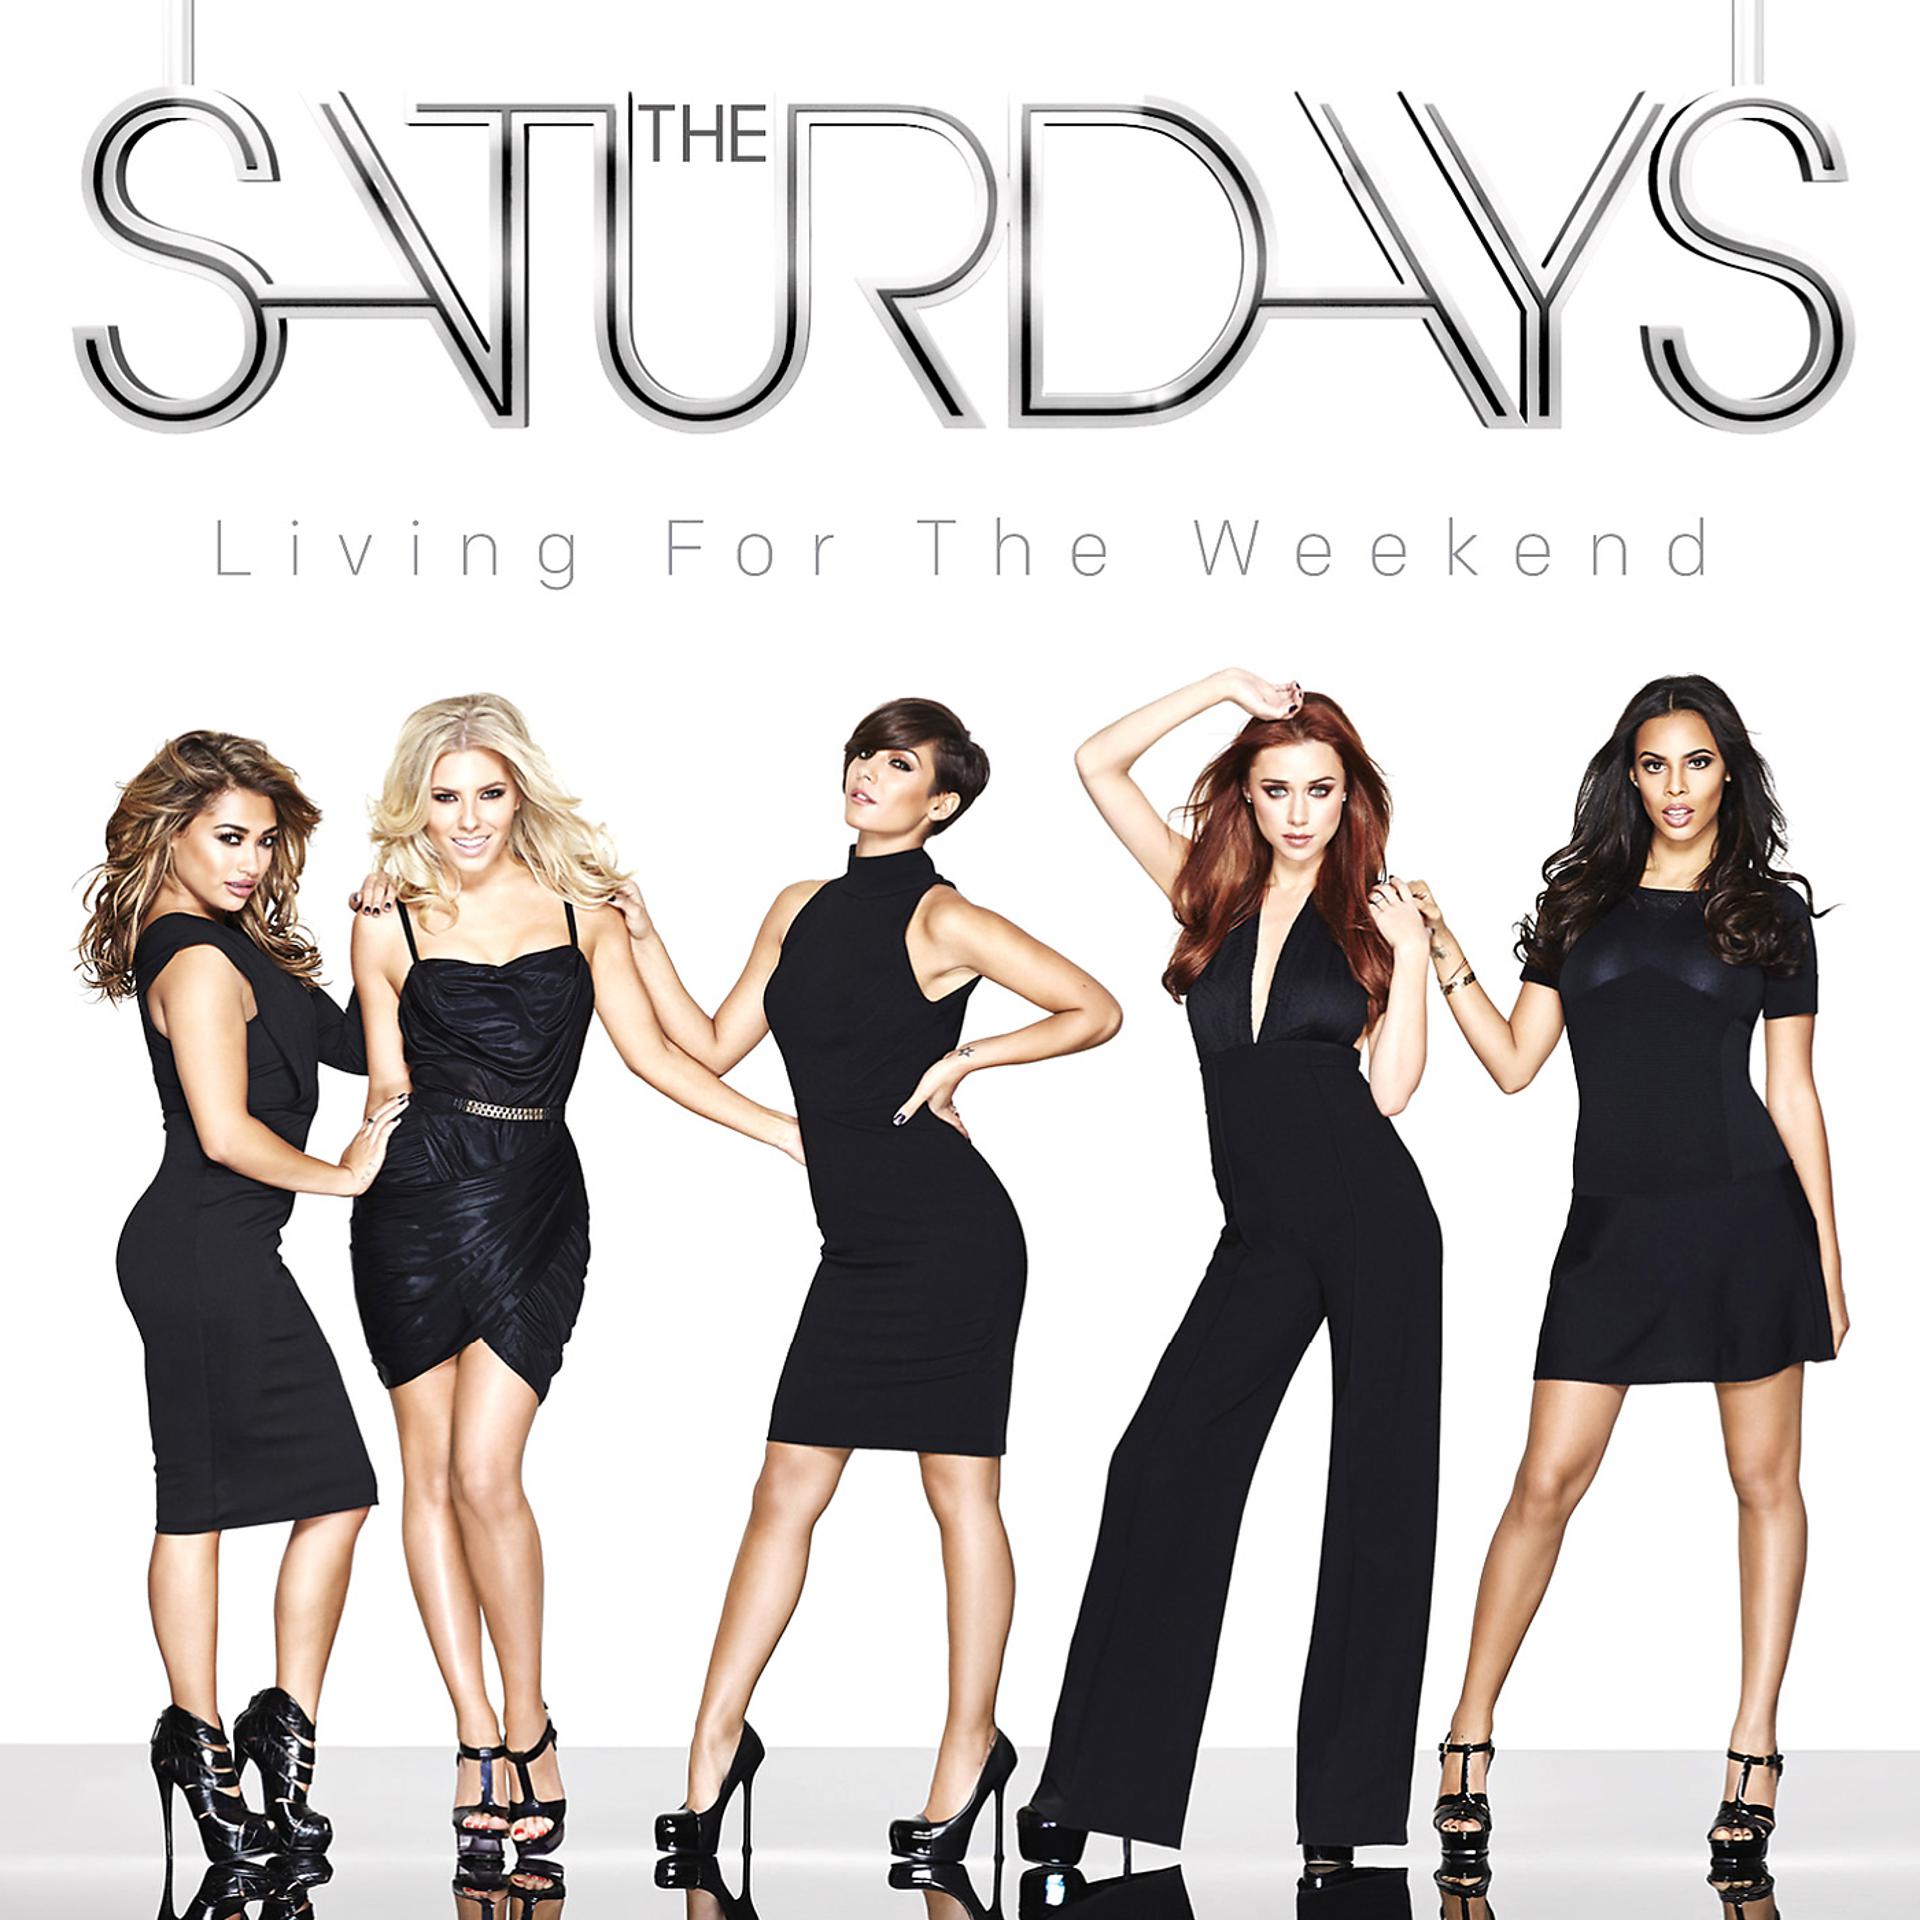 The Saturdays what about us. Where on saturdays